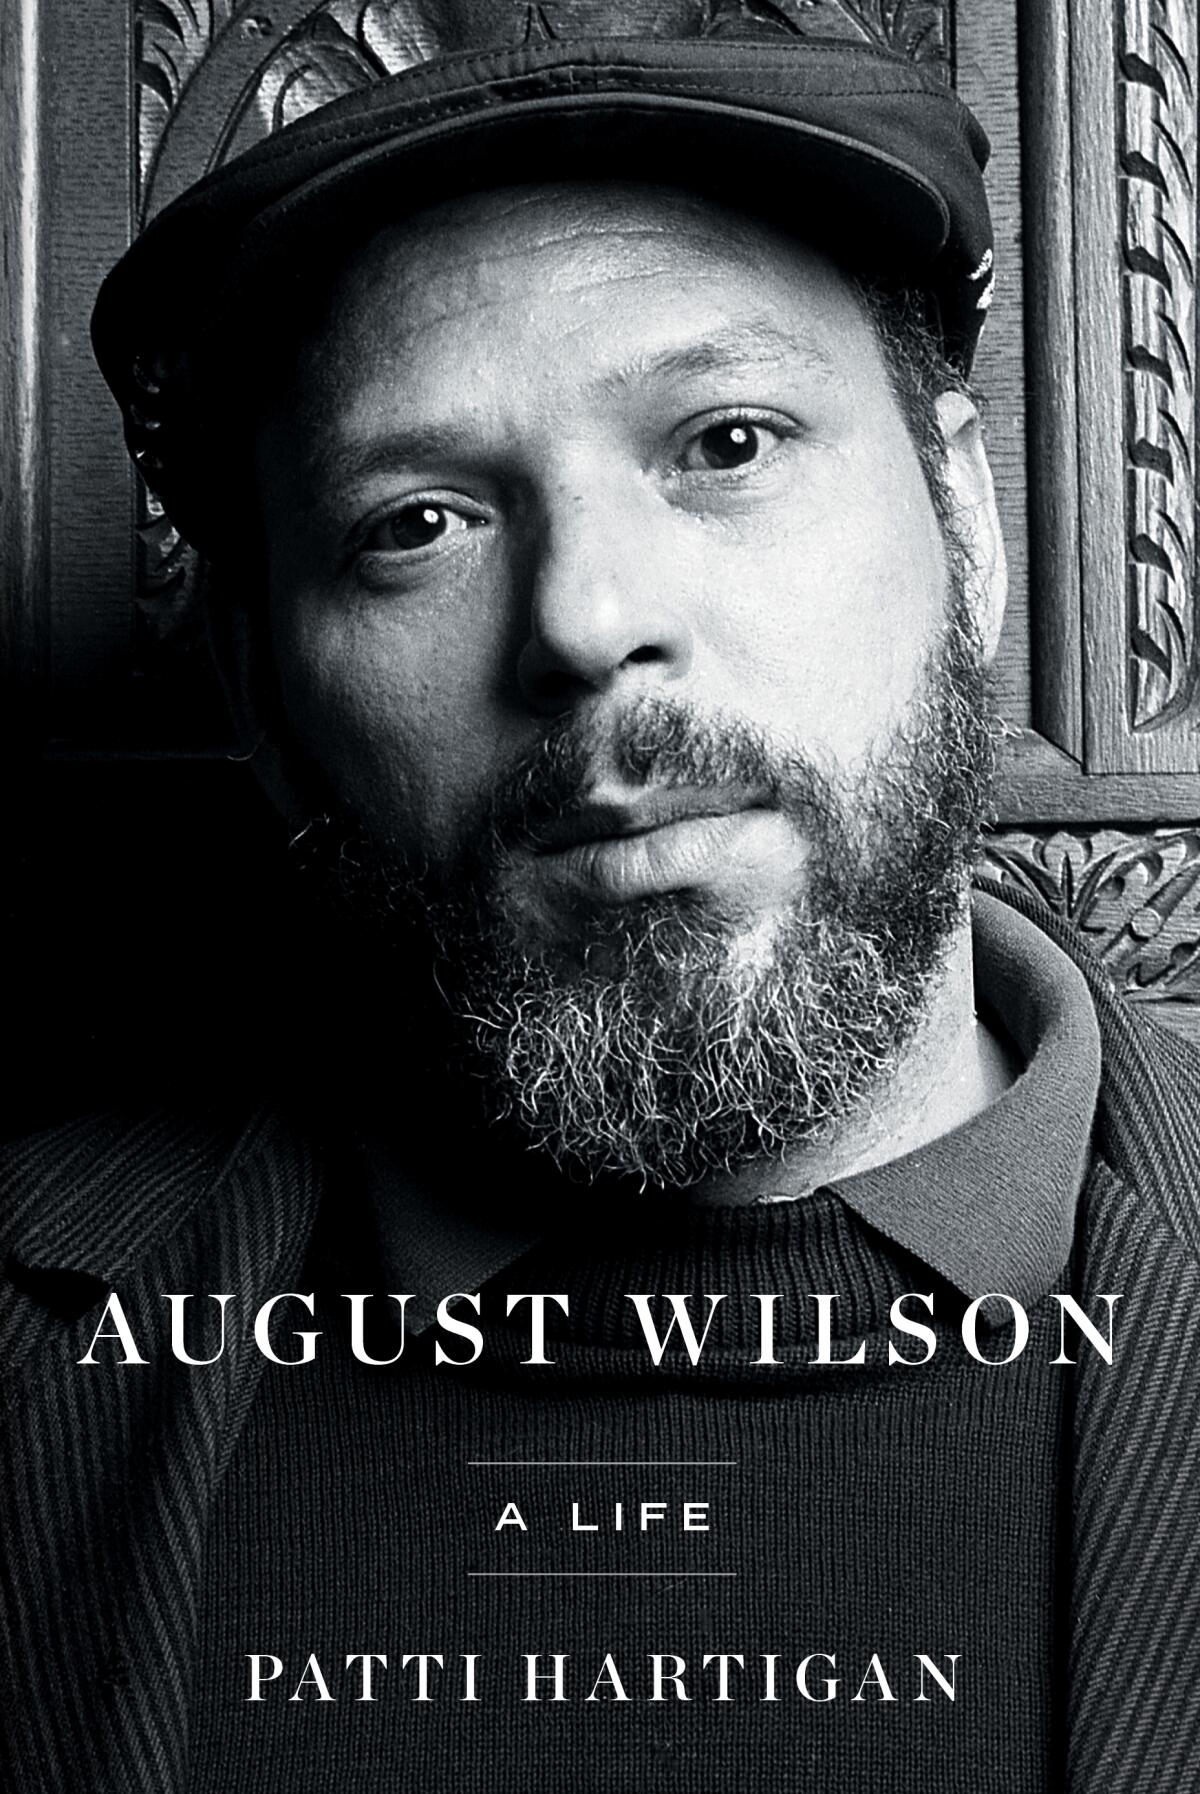 A book shows a photo of August Wilson, a Black man wearing a cap and a beard, under the tile "August Wilson: A Life"